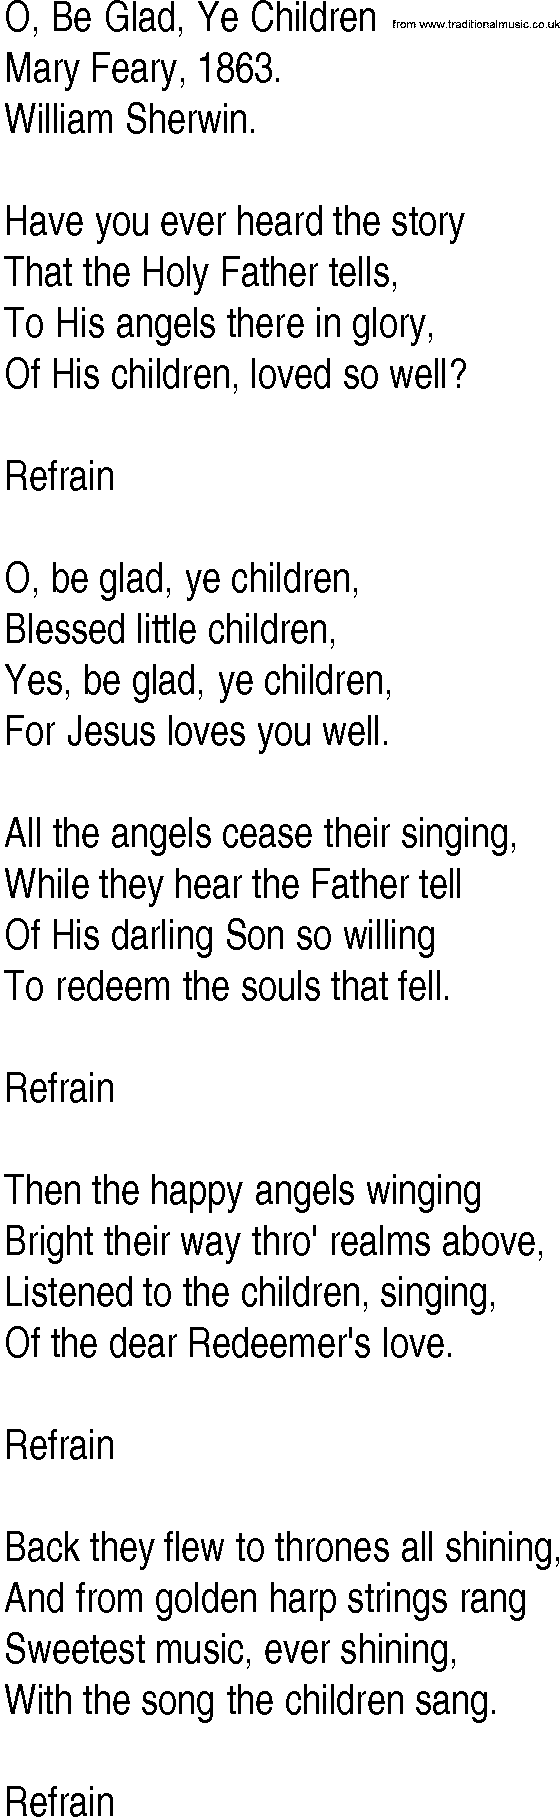 Hymn and Gospel Song: O, Be Glad, Ye Children by Mary Feary lyrics